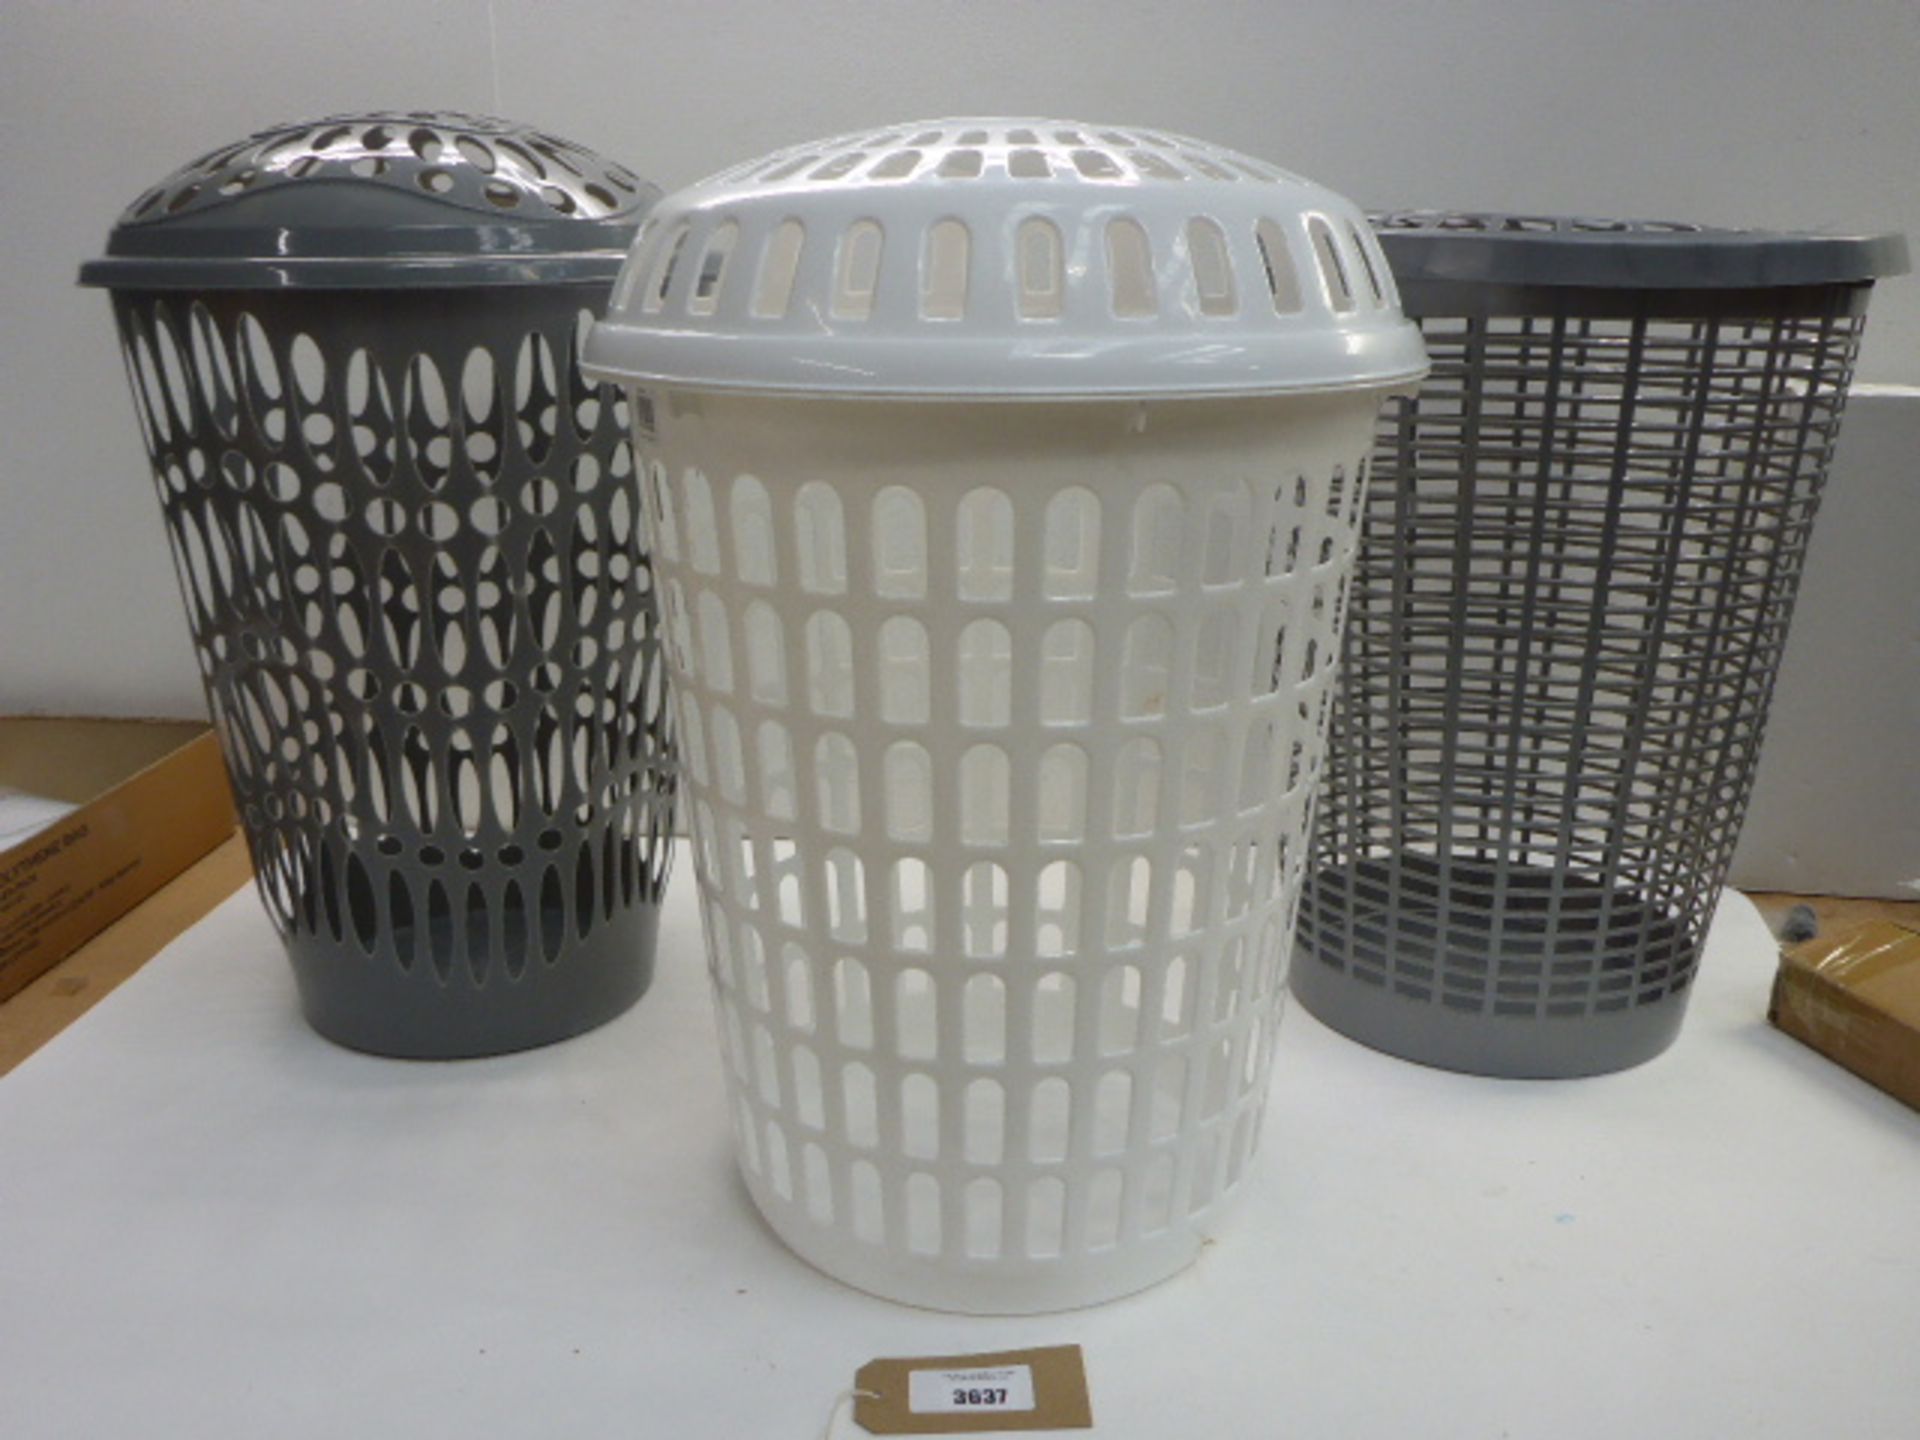 2 grey and 1 white plastic lidded laundry baskets